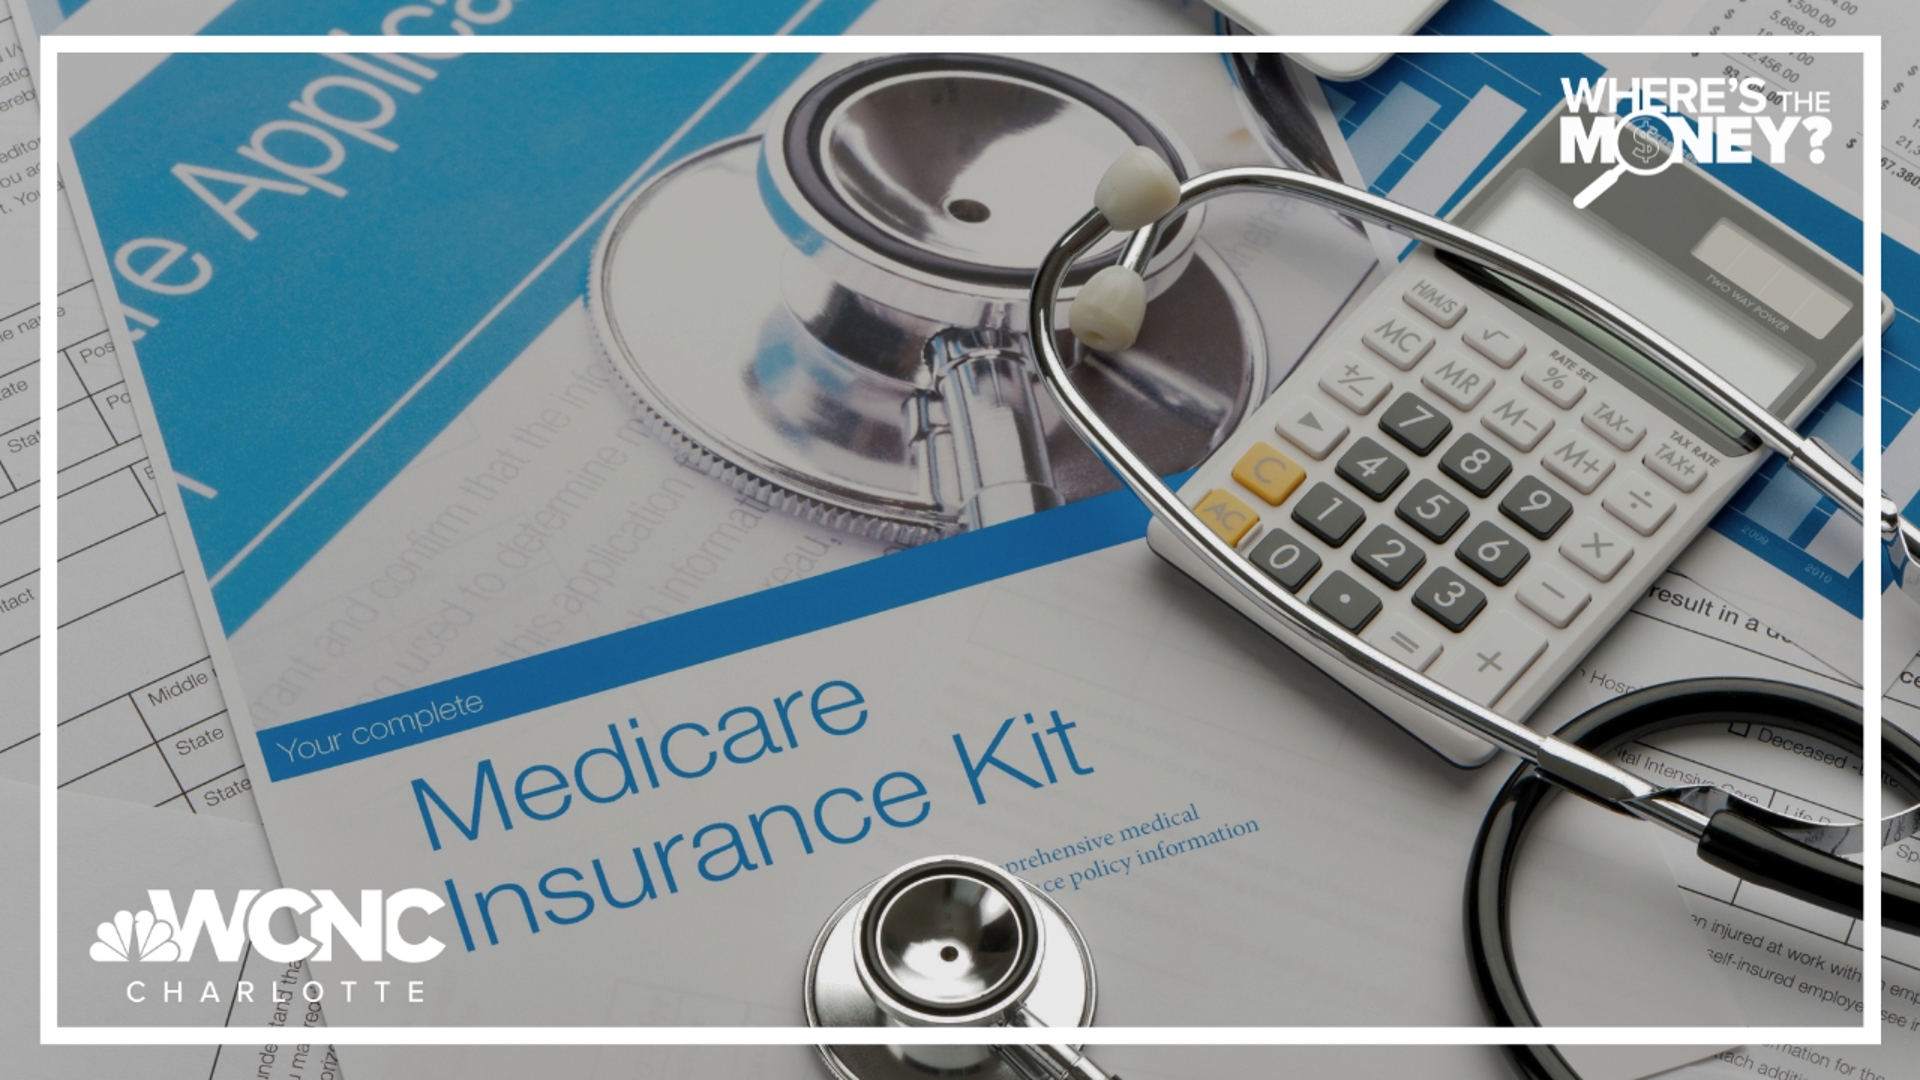 Adults turning 65 years old this year have much to consider when choosing a Medicare plan and provider.